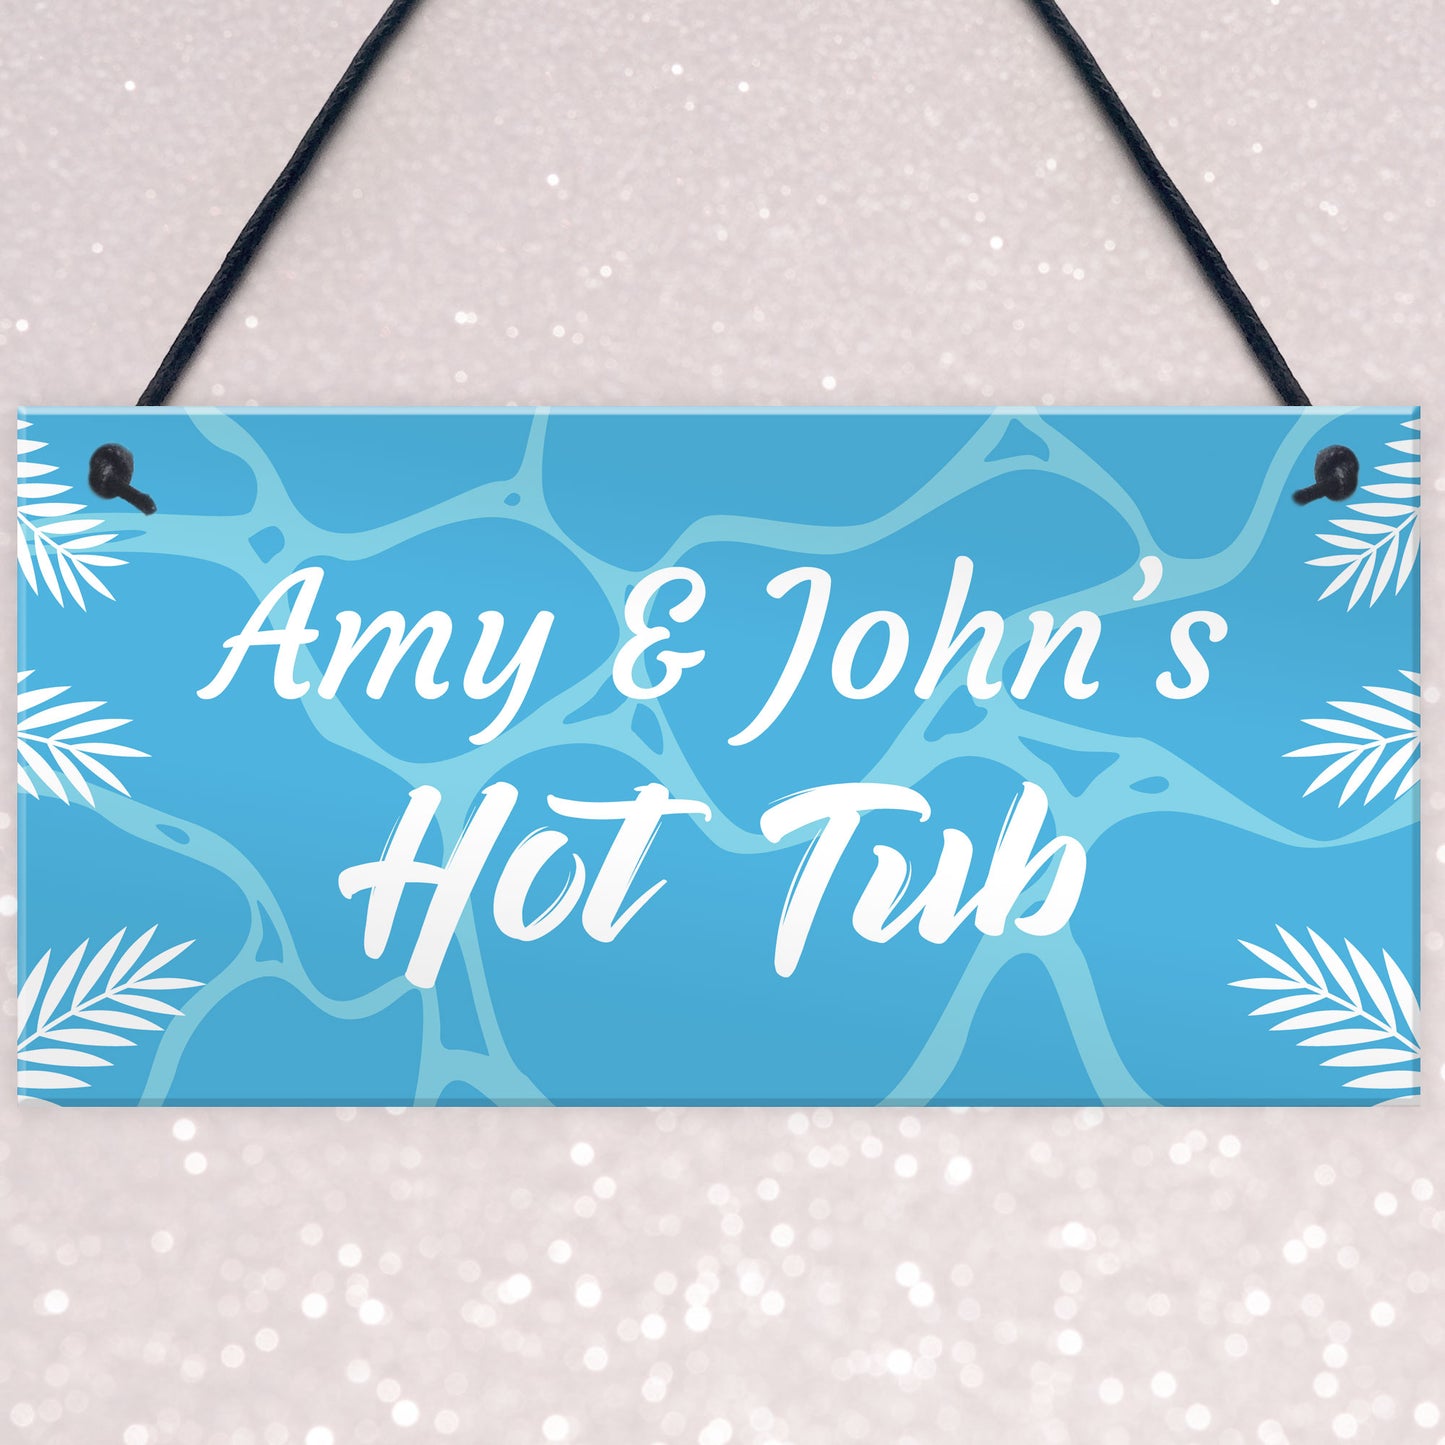 Personalised Hot Tub Plaques Novelty Hot Tub Accessories Garden